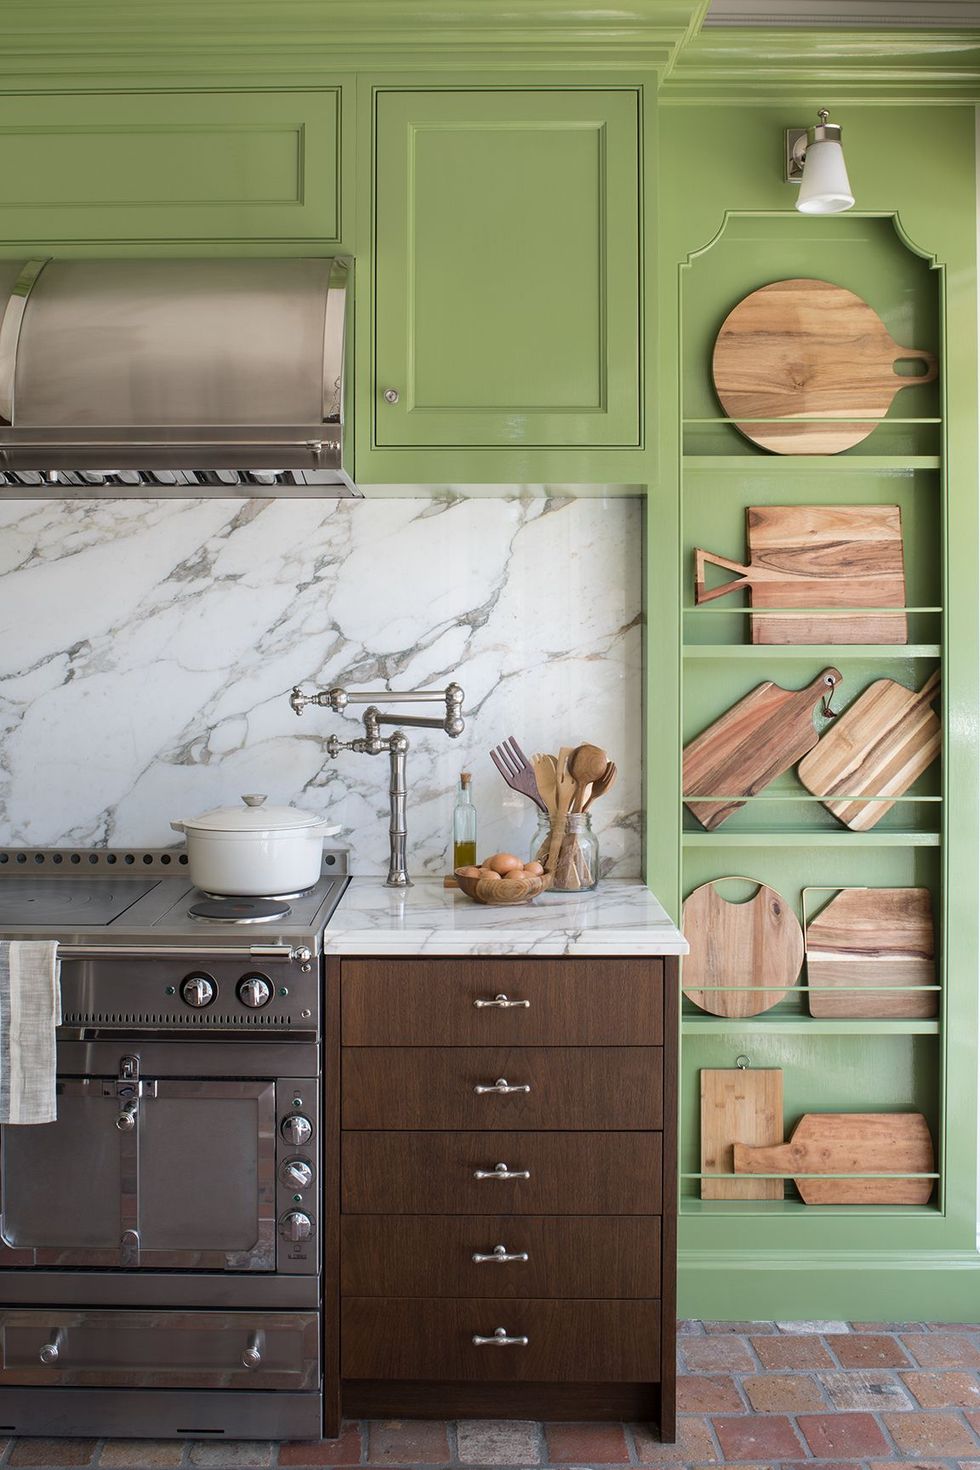 The 16 Best Wall Colors to Update Cream Cabinets & Trim - Kylie M Interiors